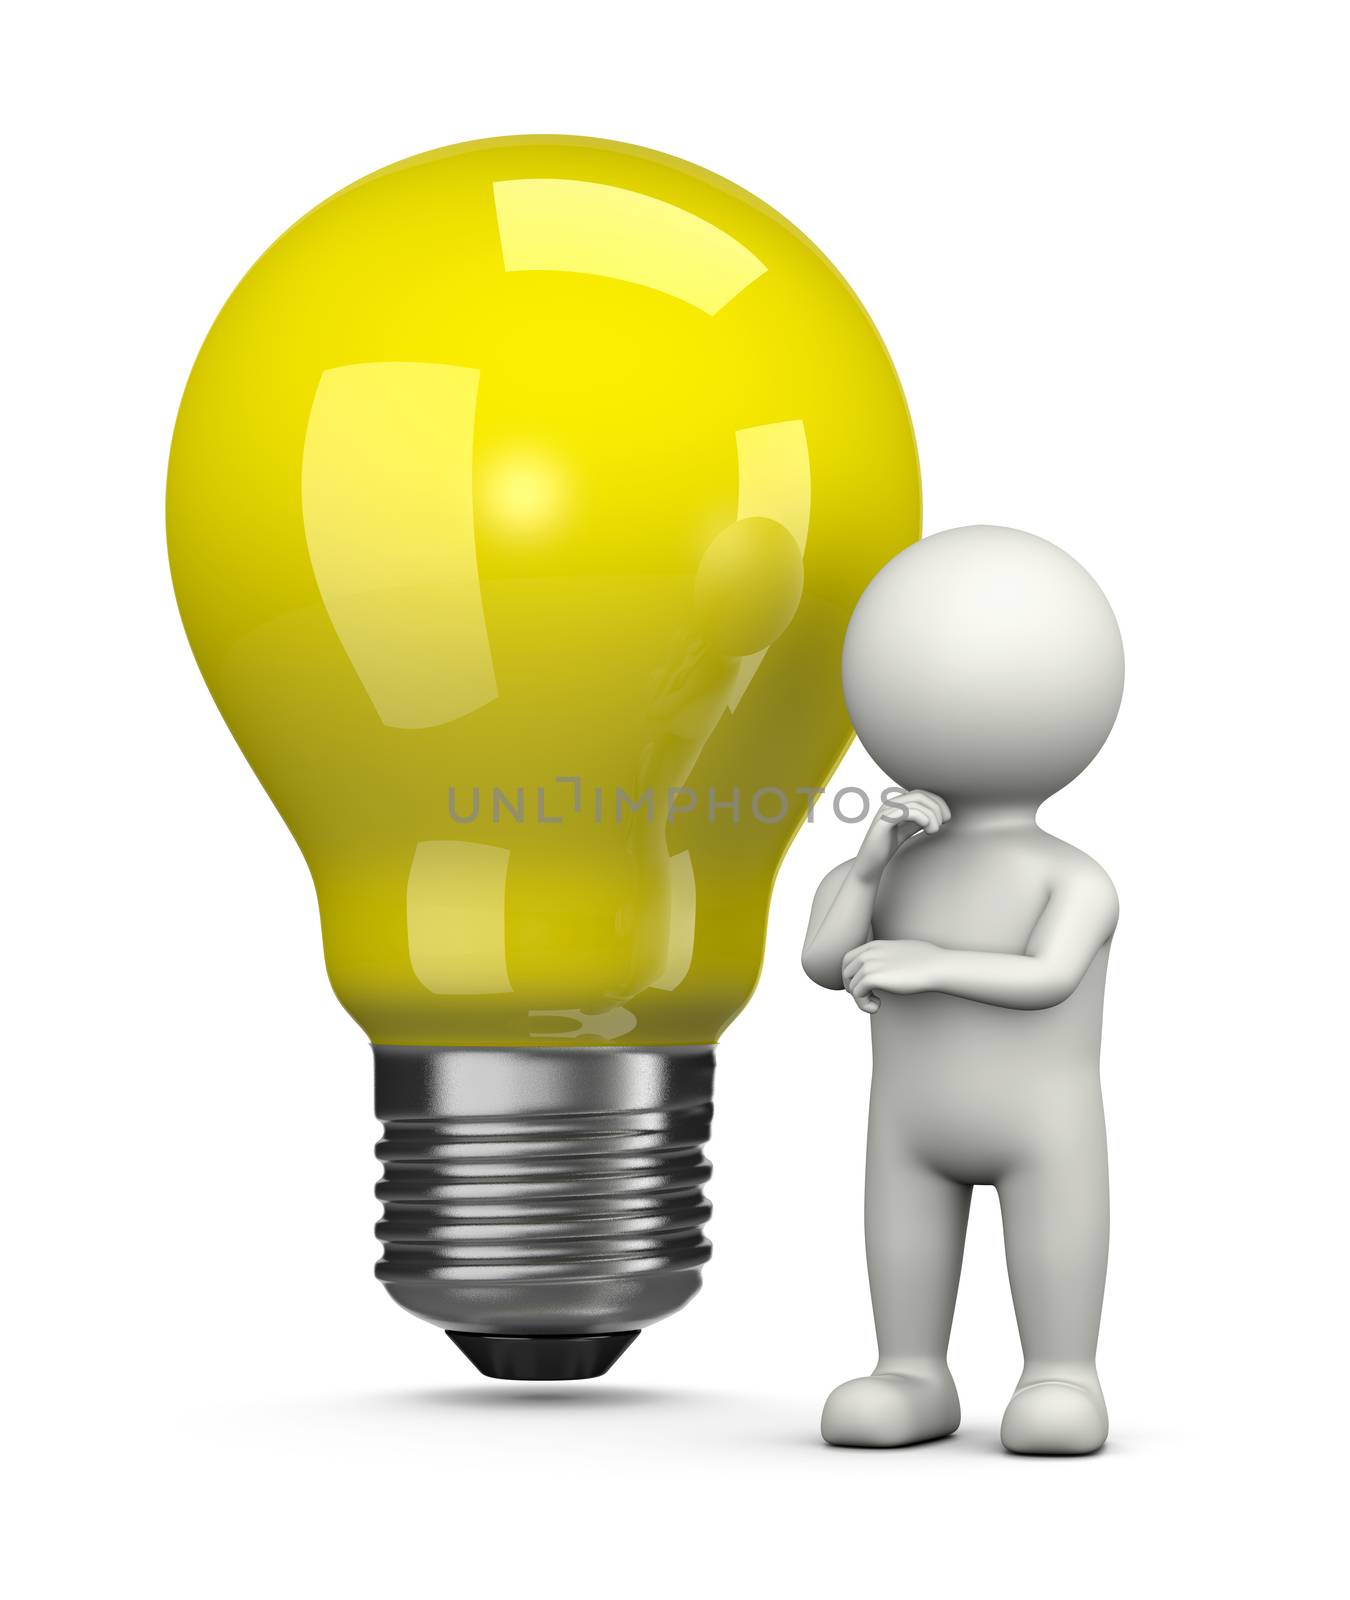 White 3D Character in Front of a Big Yellow Light Bulb Illustration on White Background